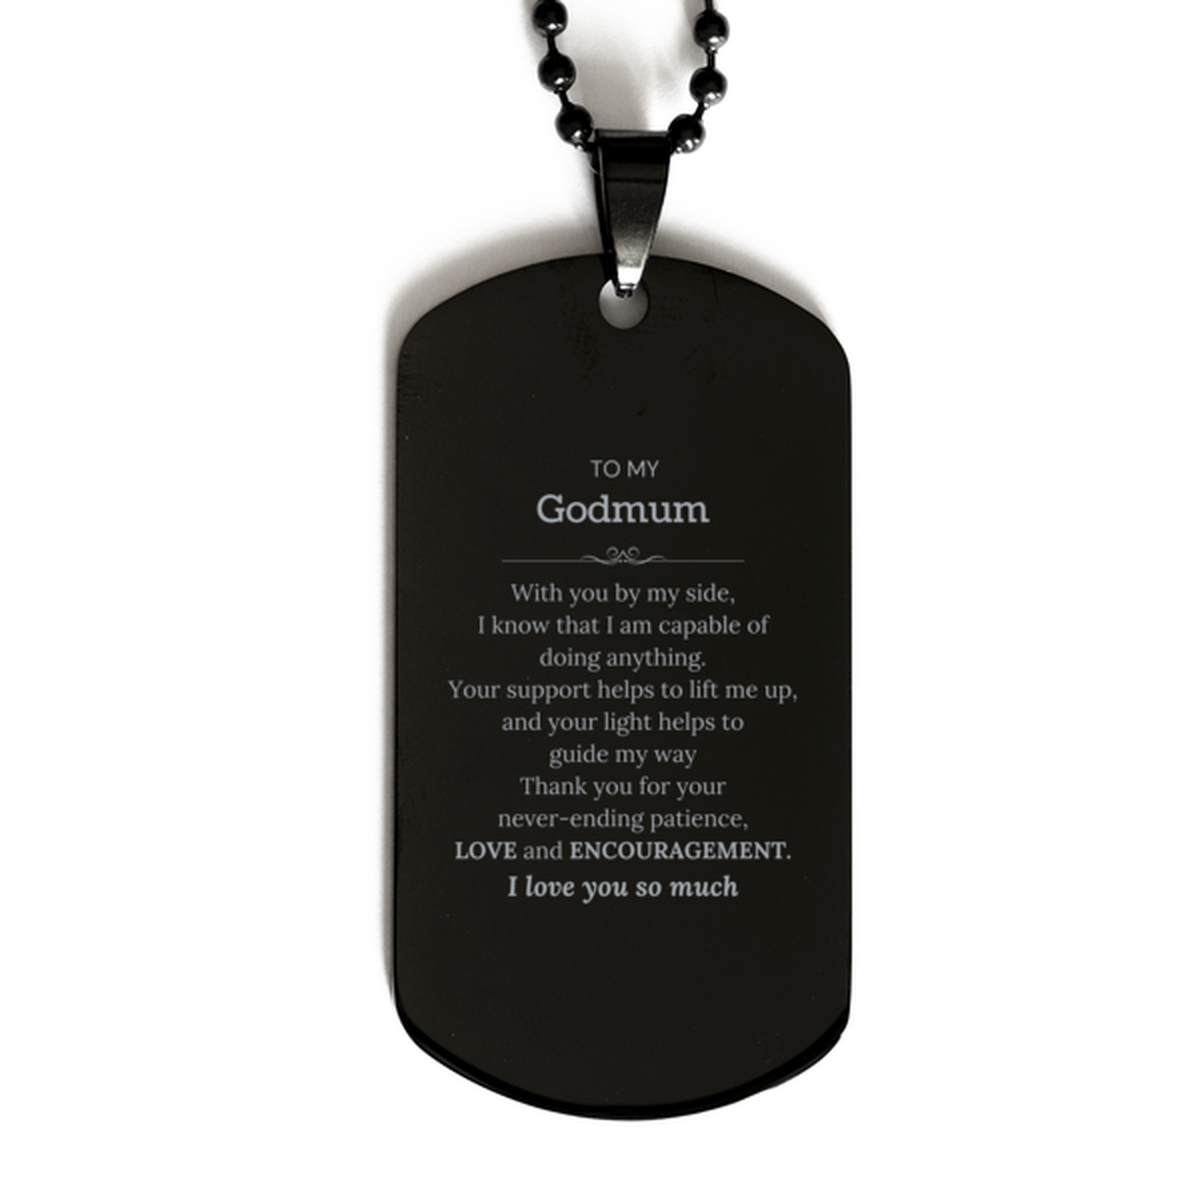 Appreciation Godmum Black Dog Tag Gifts, To My Godmum Birthday Christmas Wedding Keepsake Gifts for Godmum With you by my side, I know that I am capable of doing anything. I love you so much